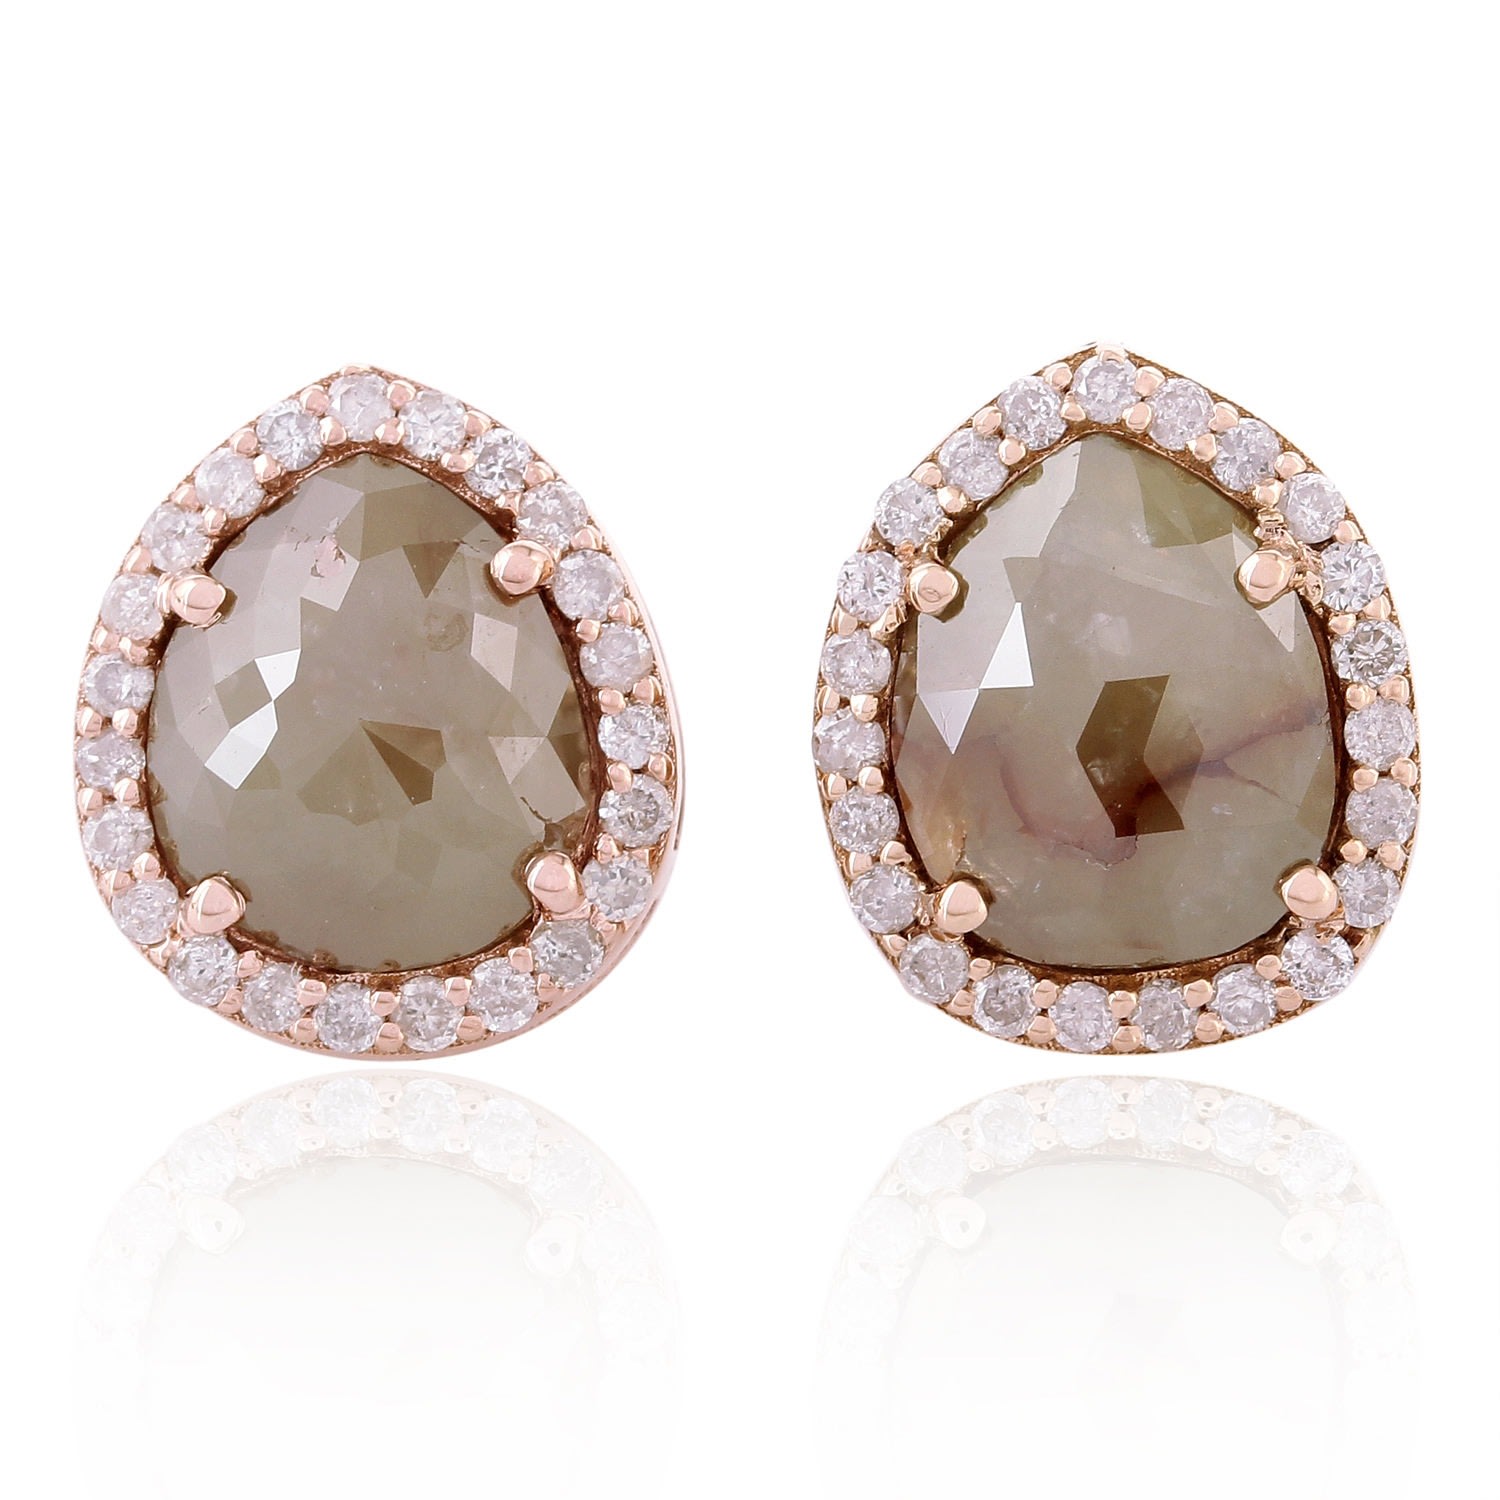 Women’s Rose Gold / White / Brown Natural Pear Cut Ice Diamond Stud Earrings In 18K Rose Gold Jewelry Artisan